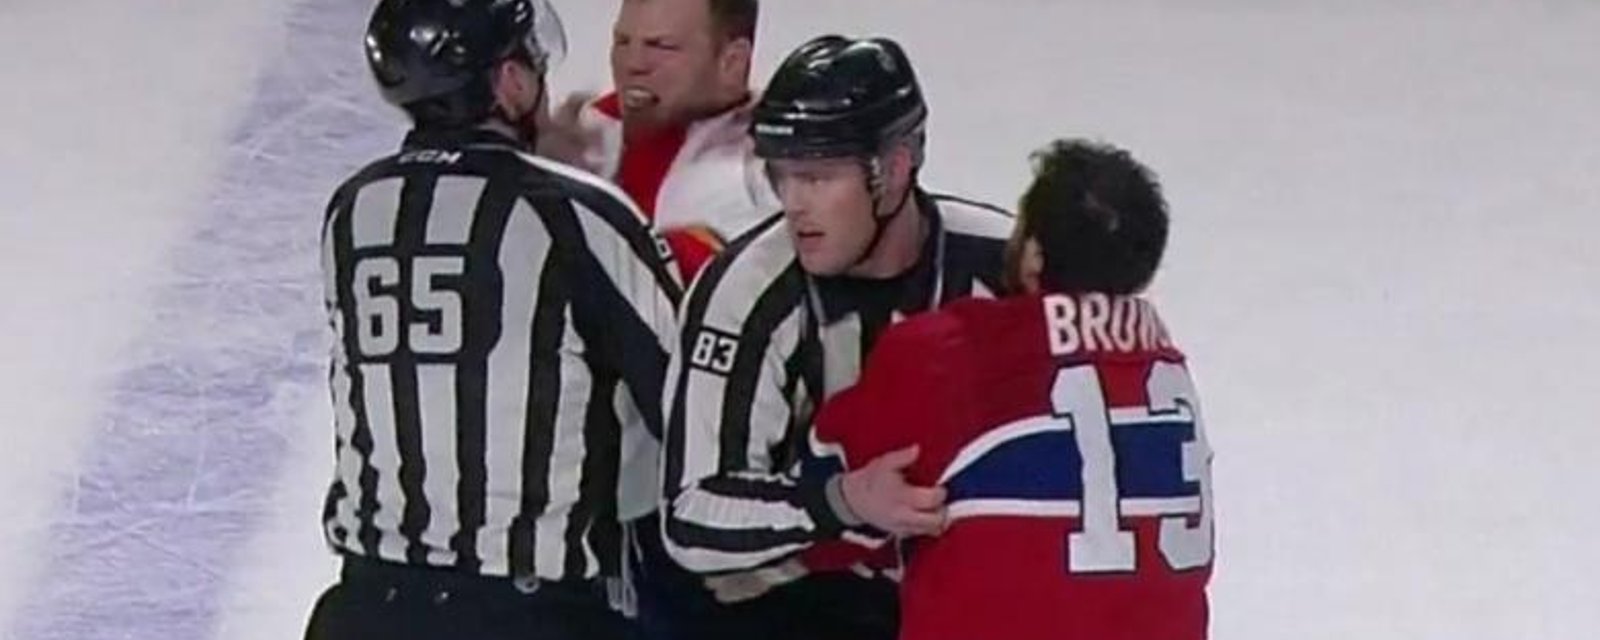 Thornton chews out the officials for breaking up fight too early.